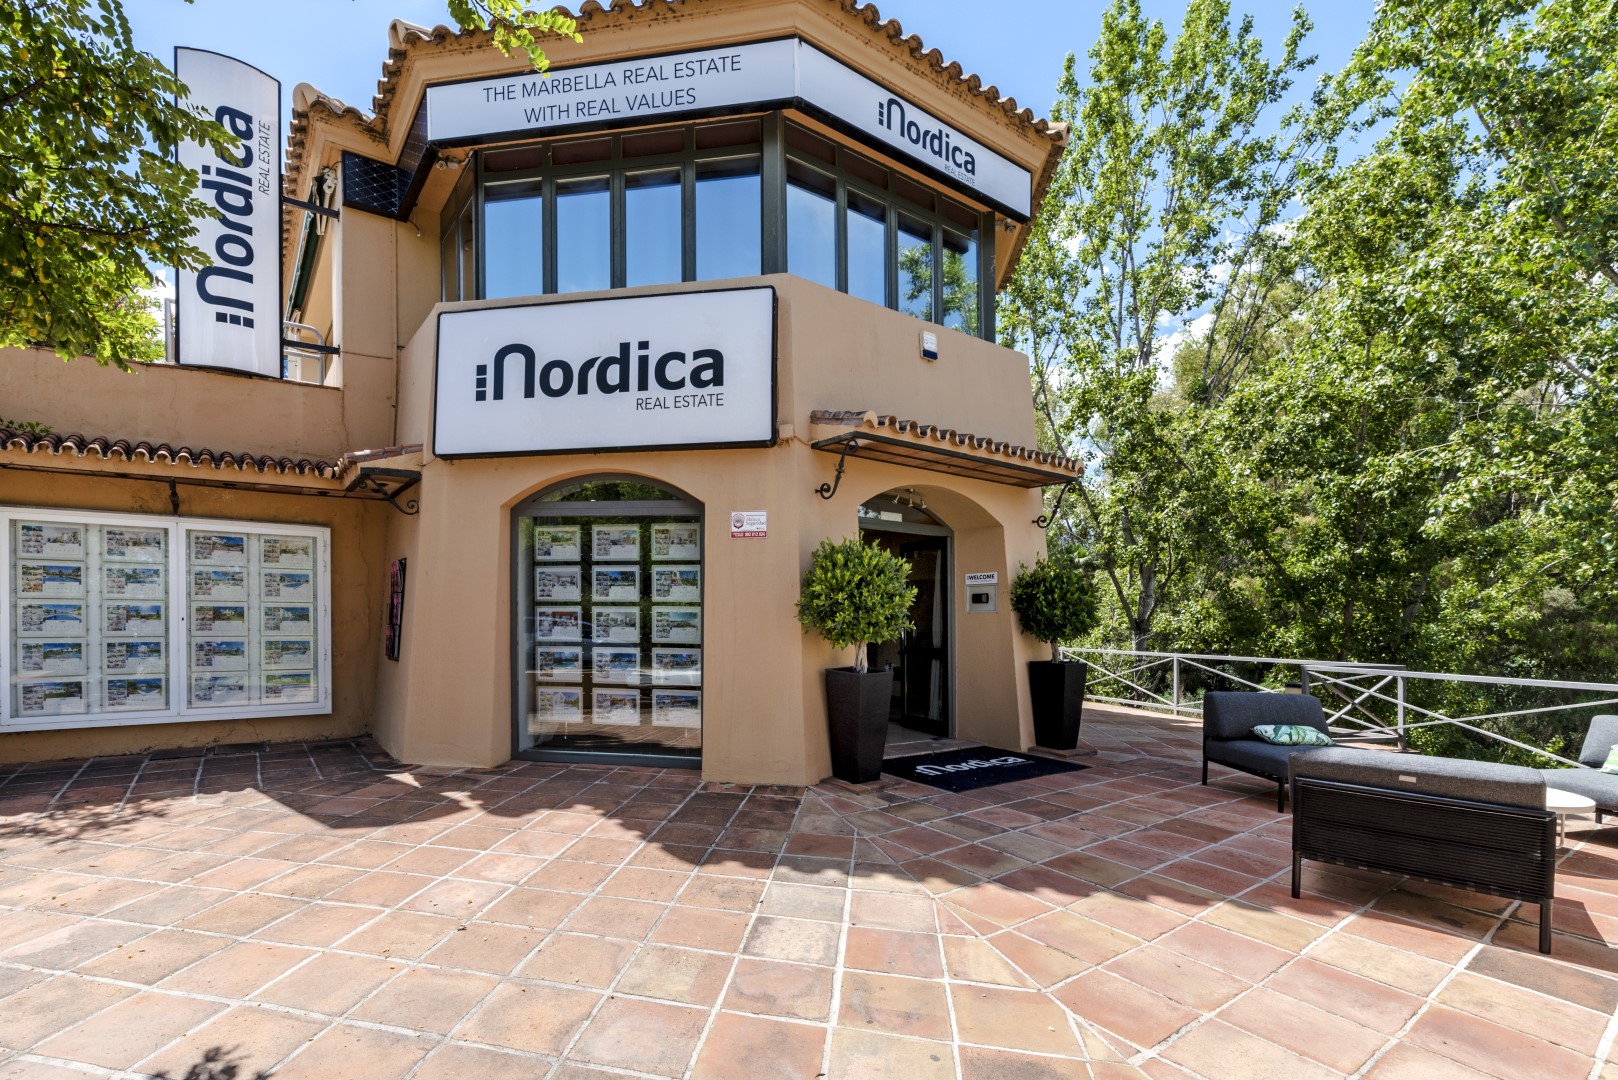 Andalucia Garden Club Sales Offices